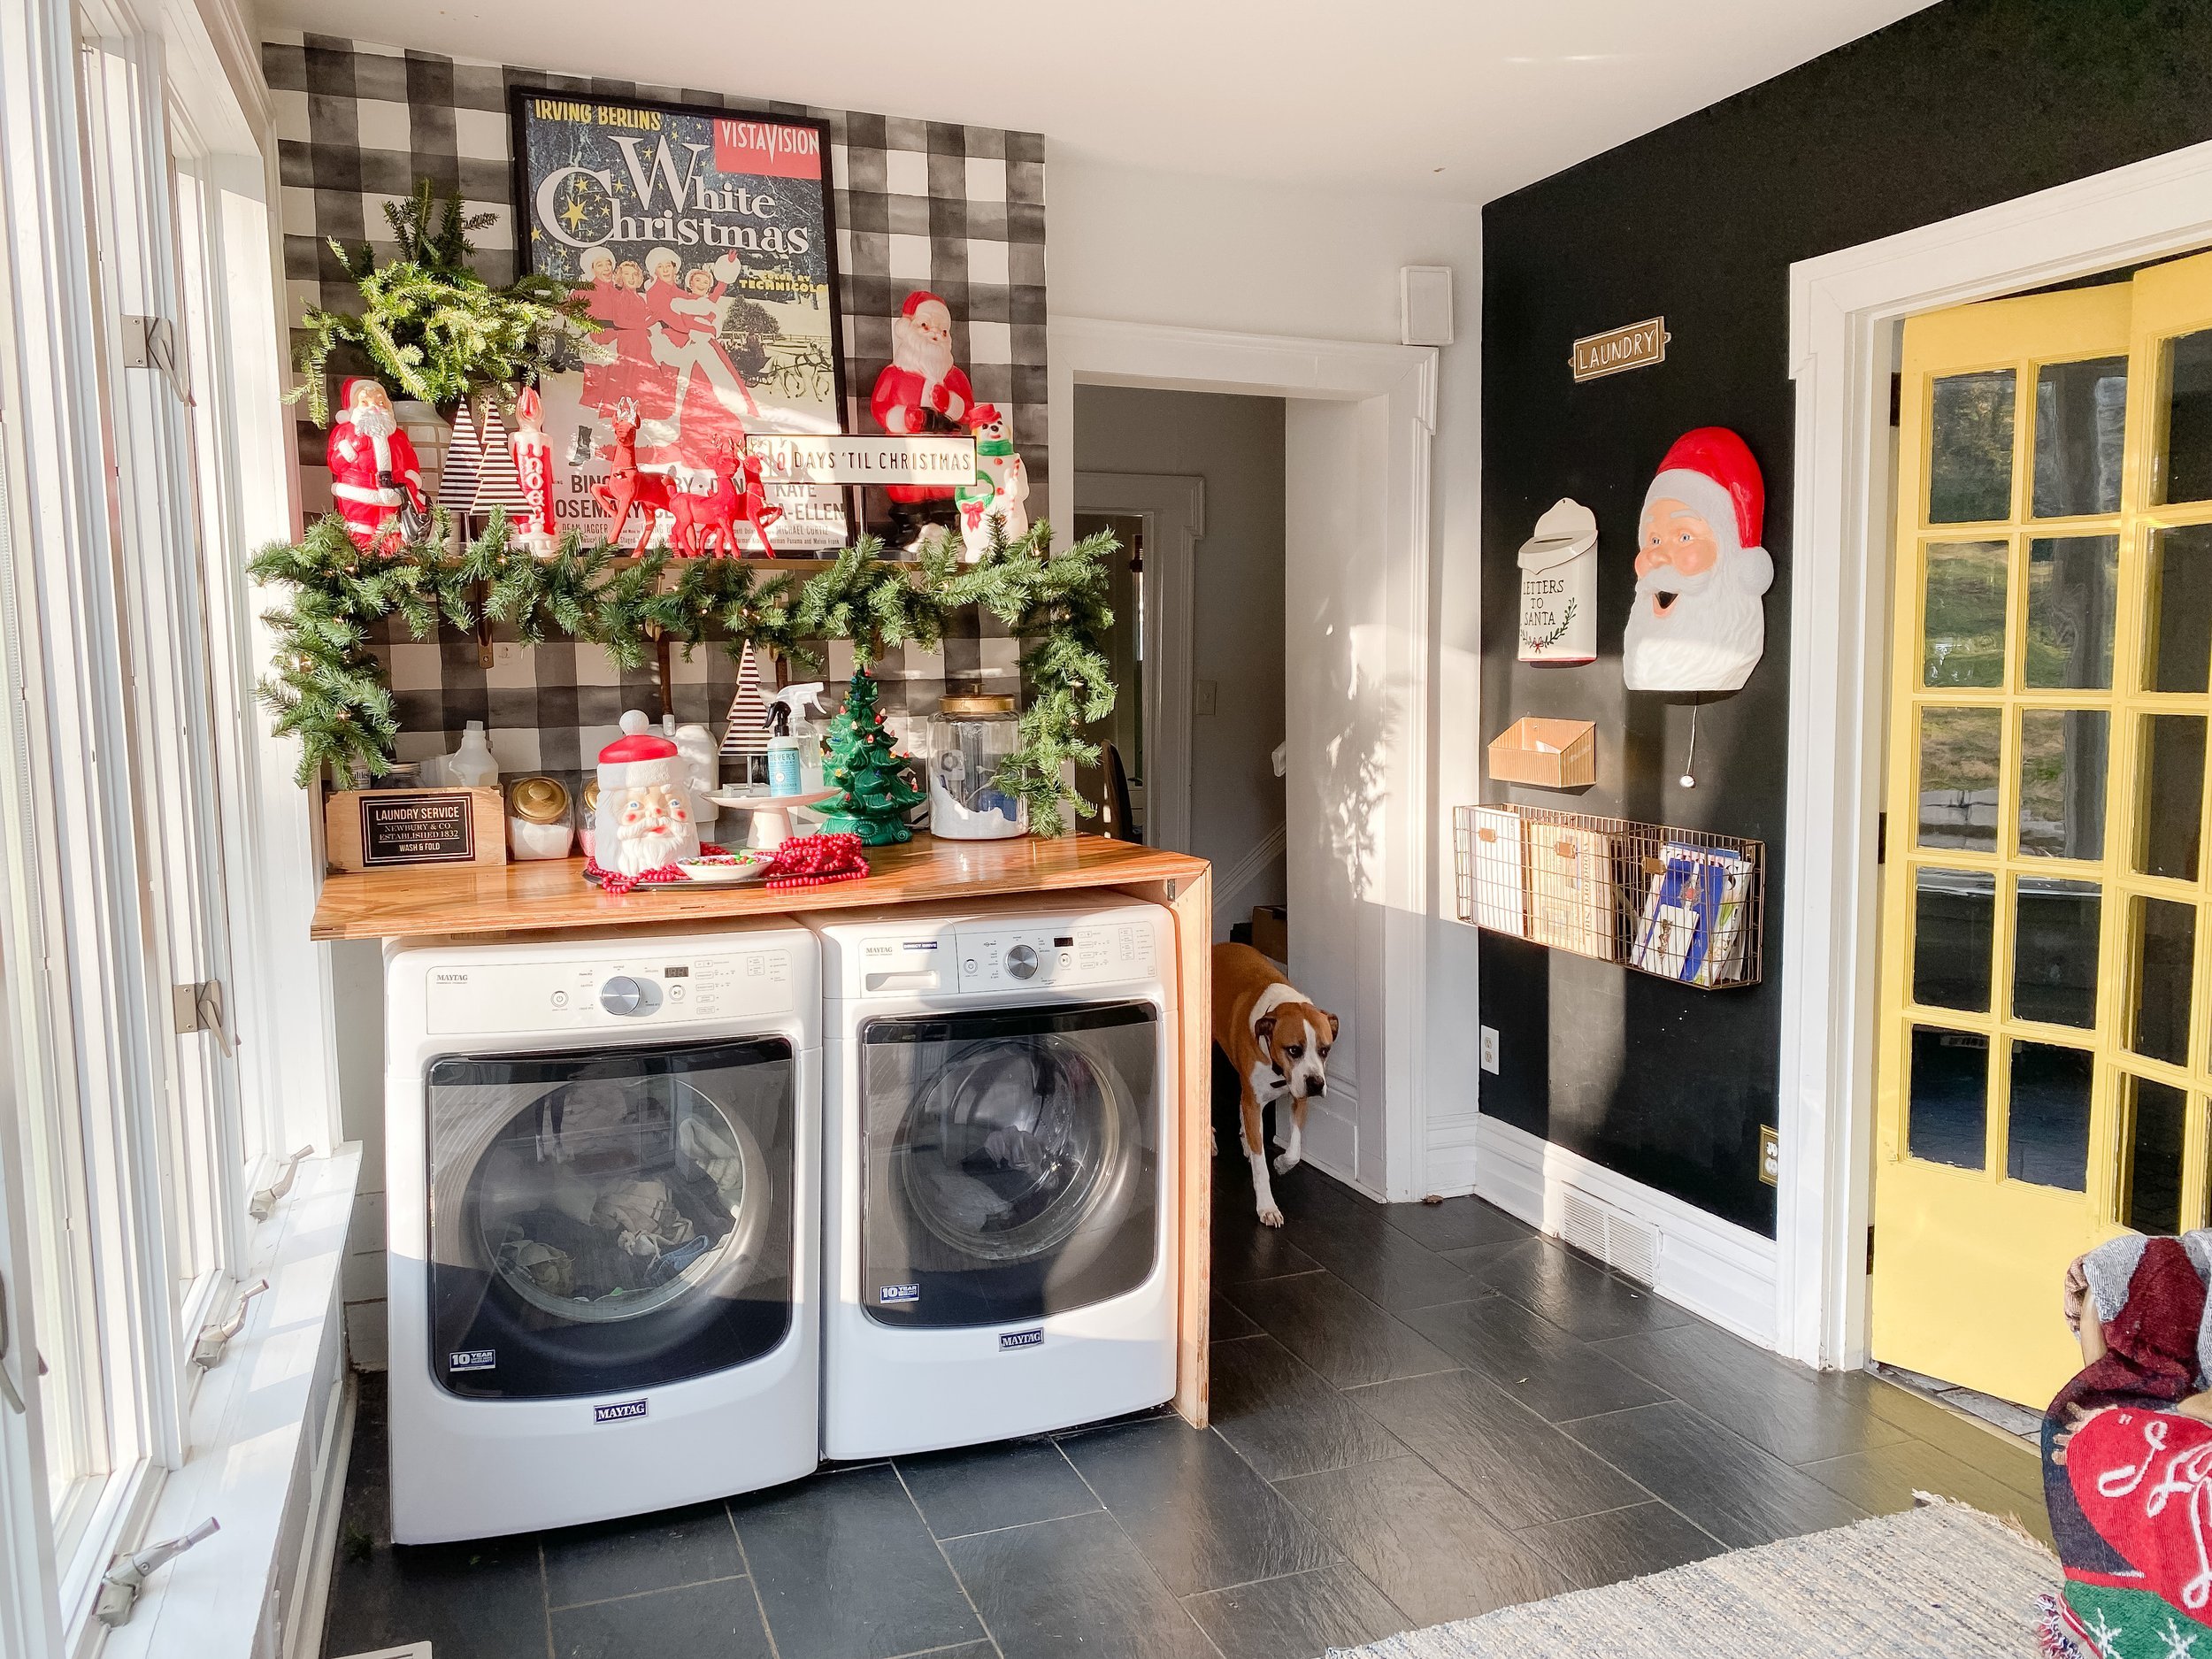 Holiday Home Tour 2021: Retro + Kitschy Mudroom and Laundry Room ...